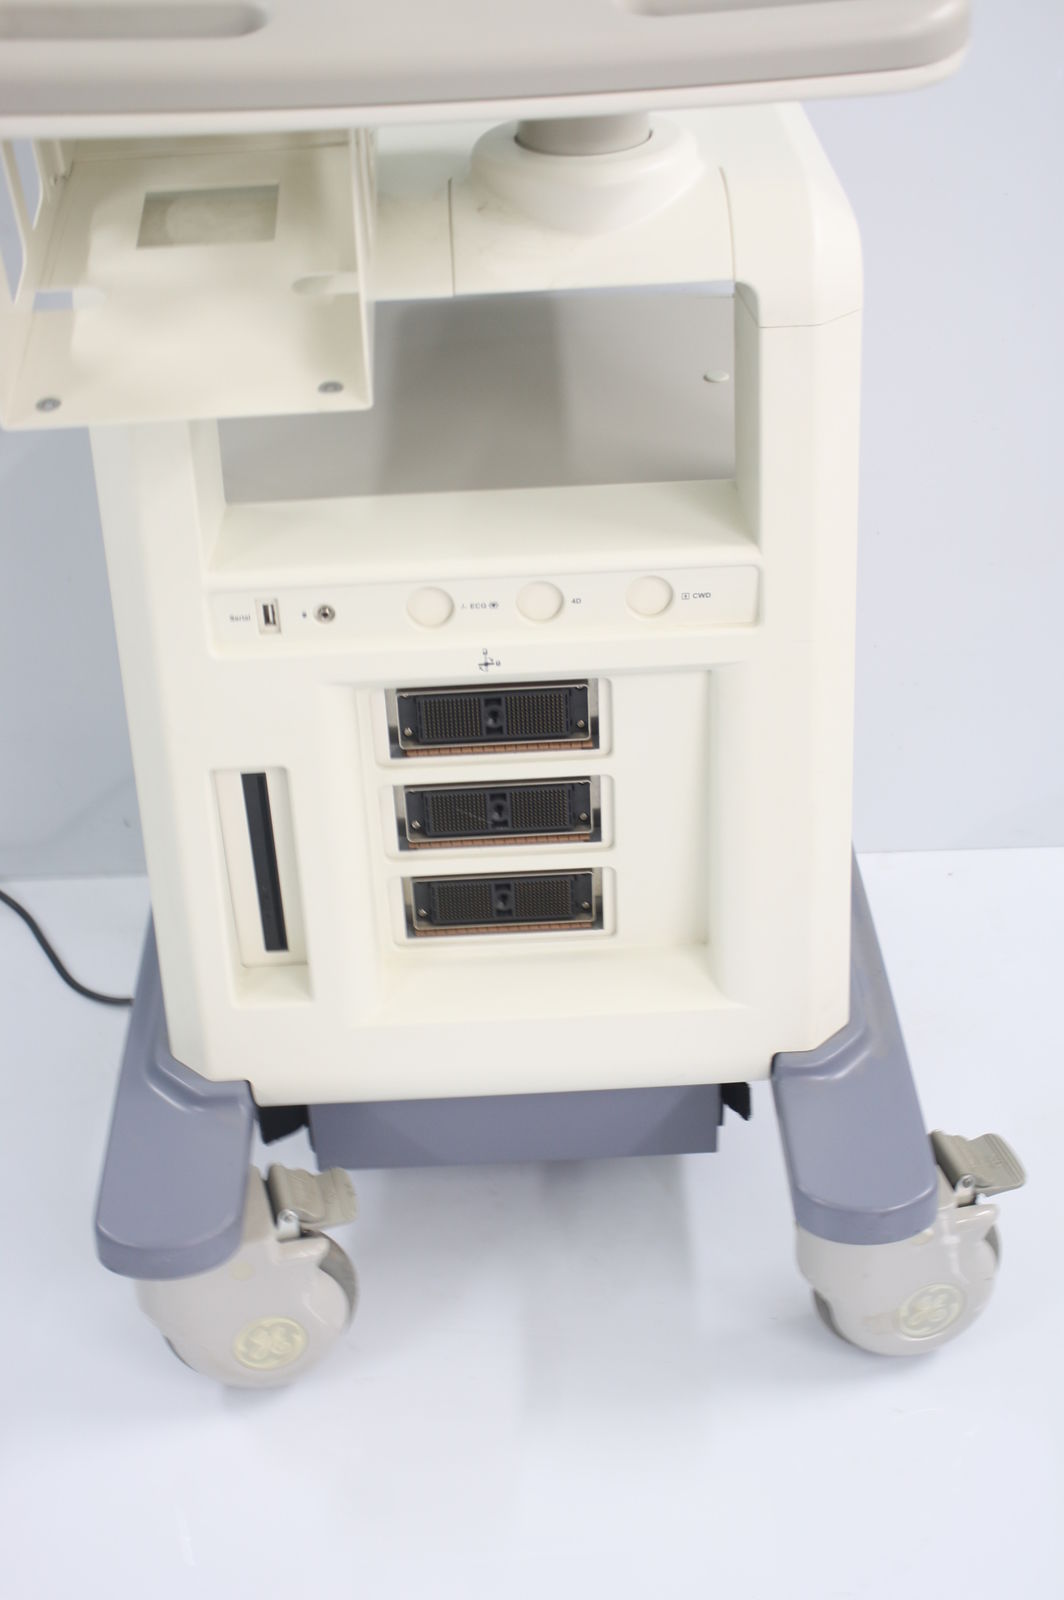 GE General Electric VIVID LOGIQ P5 Ultrasound Machine- PARTIALLY TESTED DIAGNOSTIC ULTRASOUND MACHINES FOR SALE